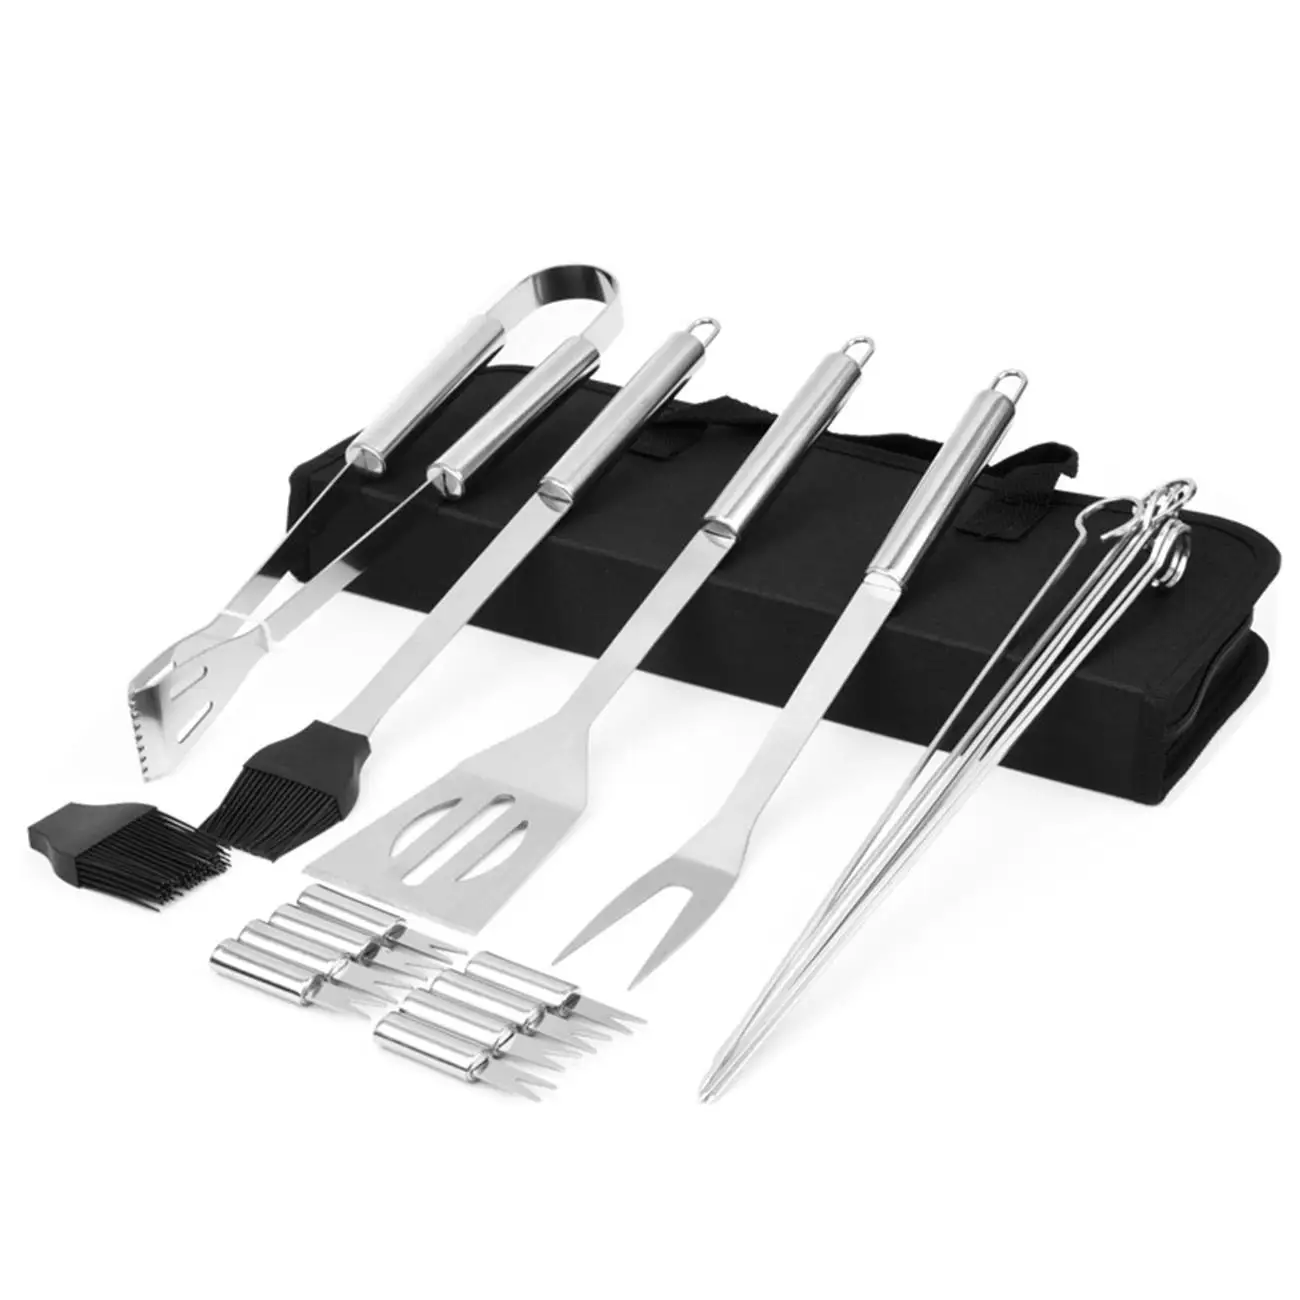 

20PCS/Set Outdoor BBQ Tools Barbecue Shovel Baking Clip Utensil Grilling Oil Brush Accessories Gril Set Camping Tool